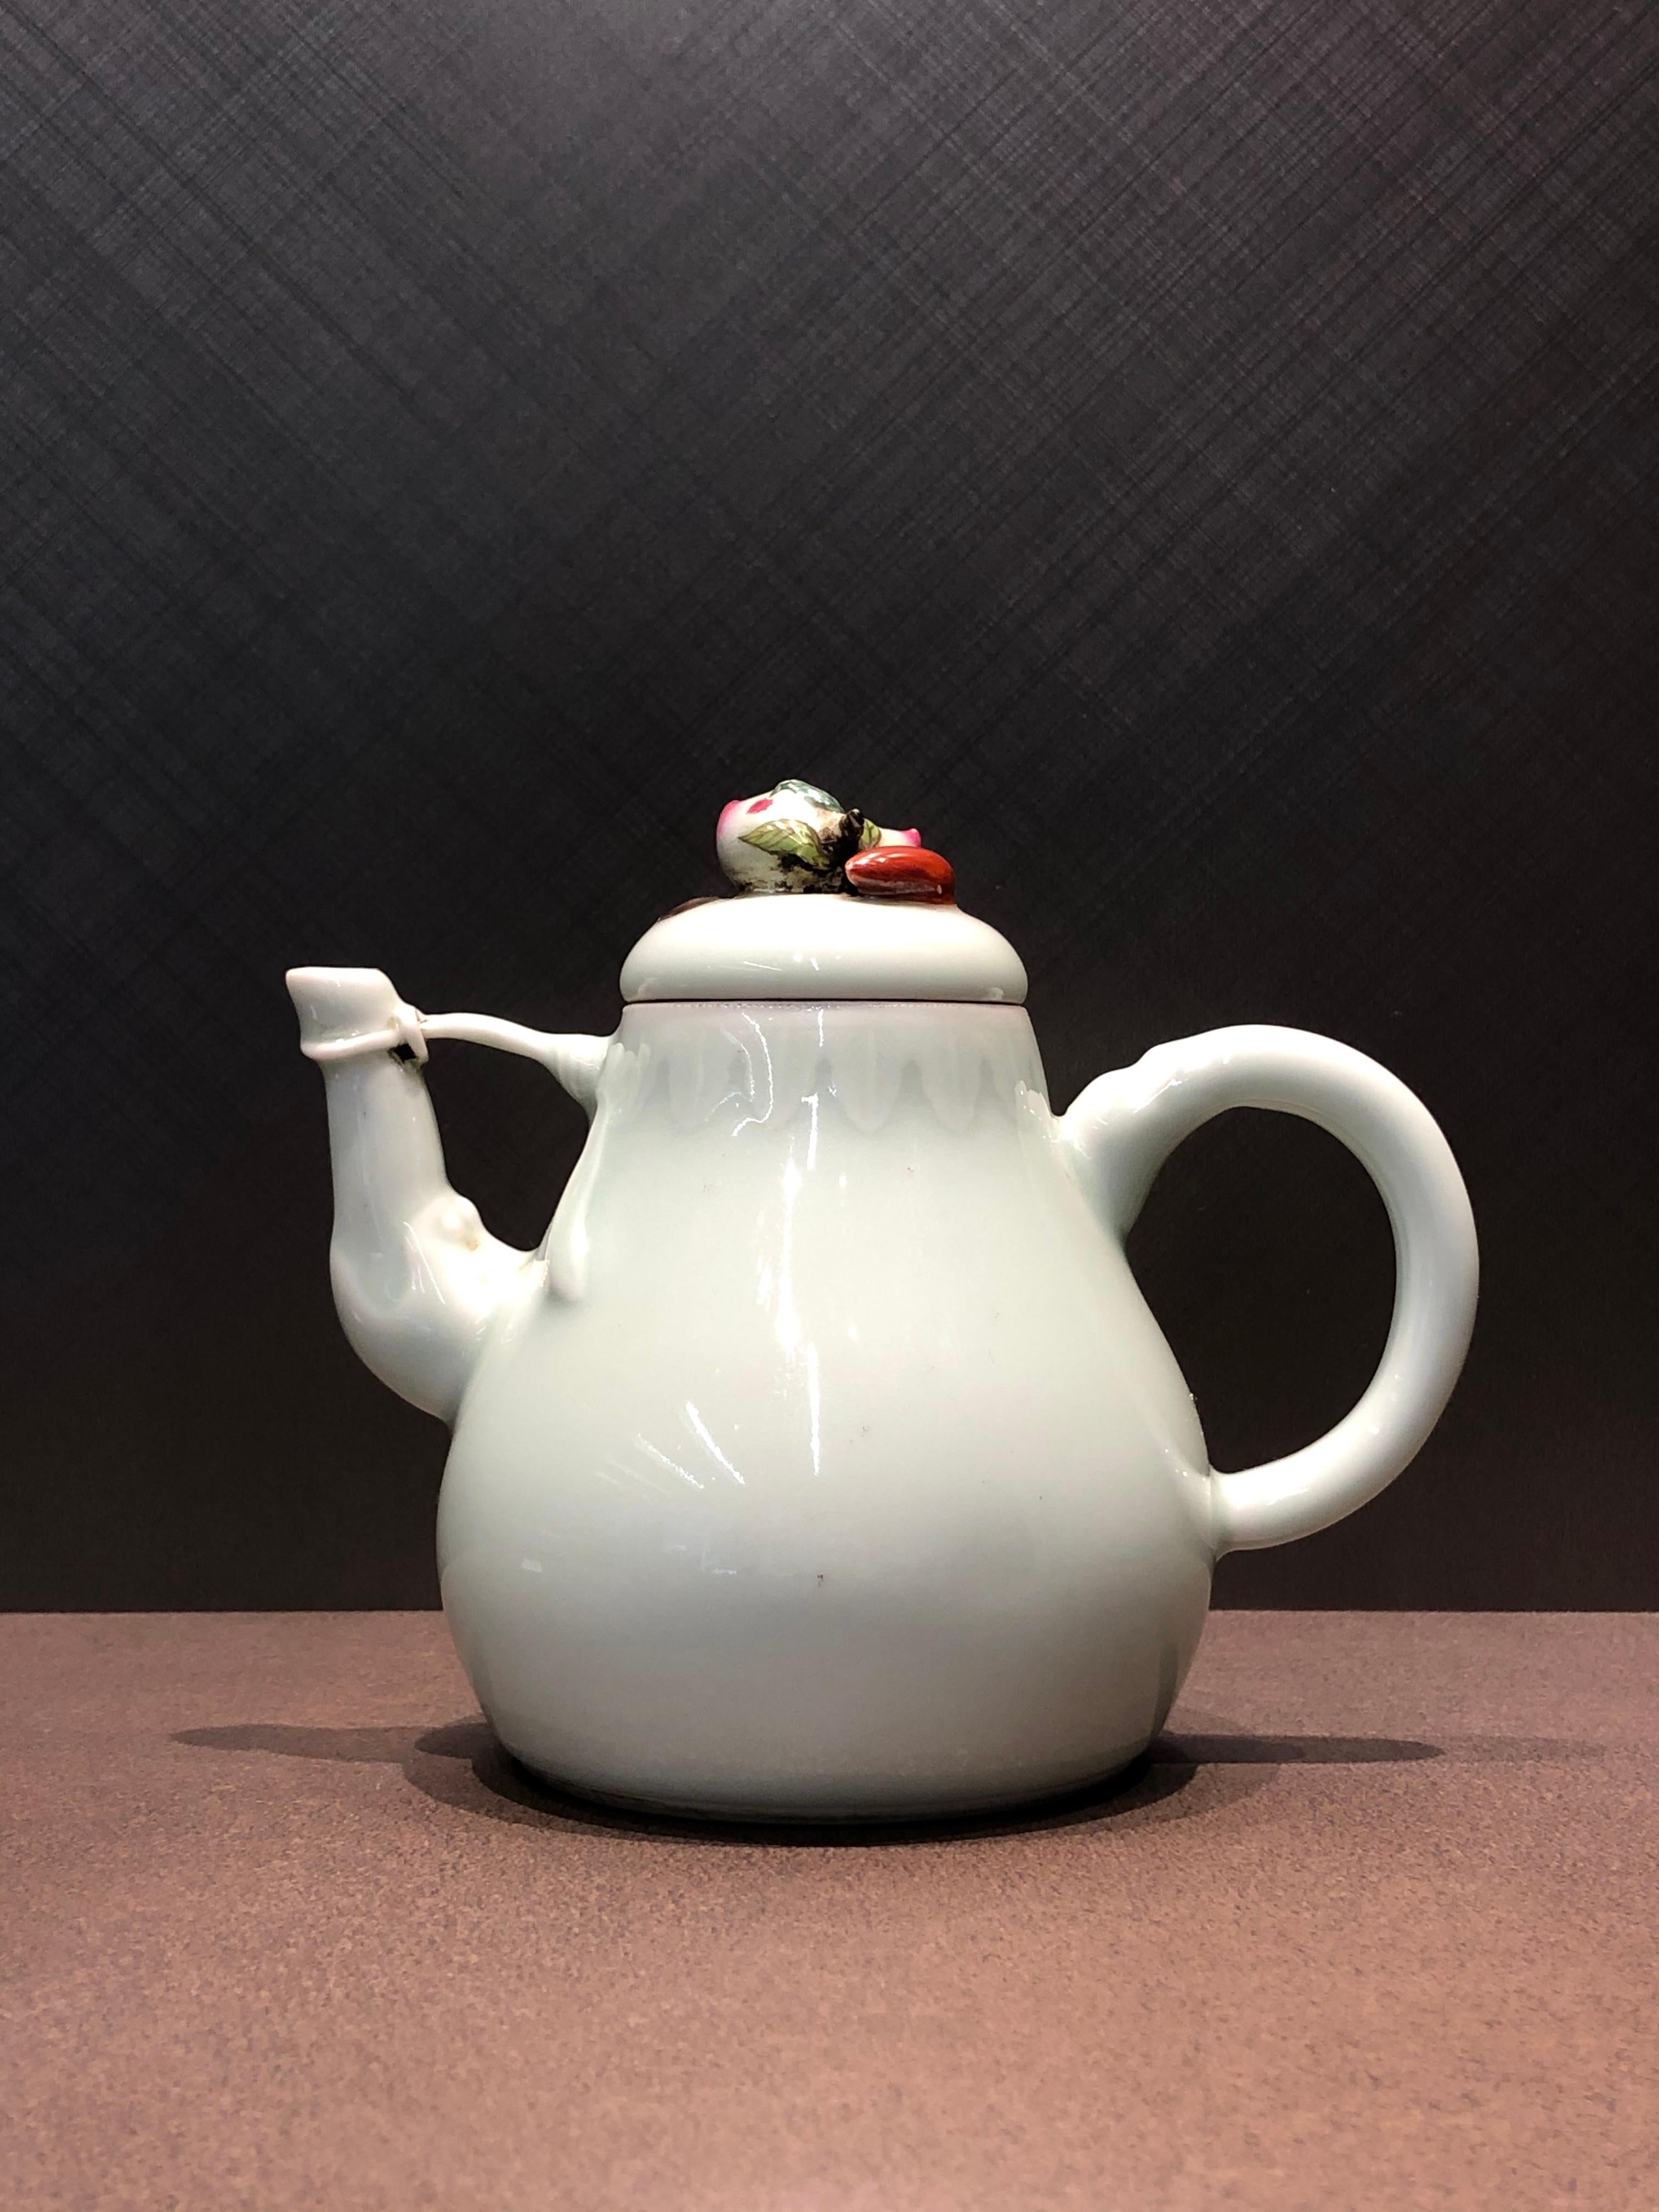 Teapot made in Jingdezhen at the period of Qing Dynasty.
Jingdezhen is famous production center of fine quality of Chinese ceramics.
The official kilns began in 1004 during the Song Dynasty and flourished during the Ming and Qing Dynasties.